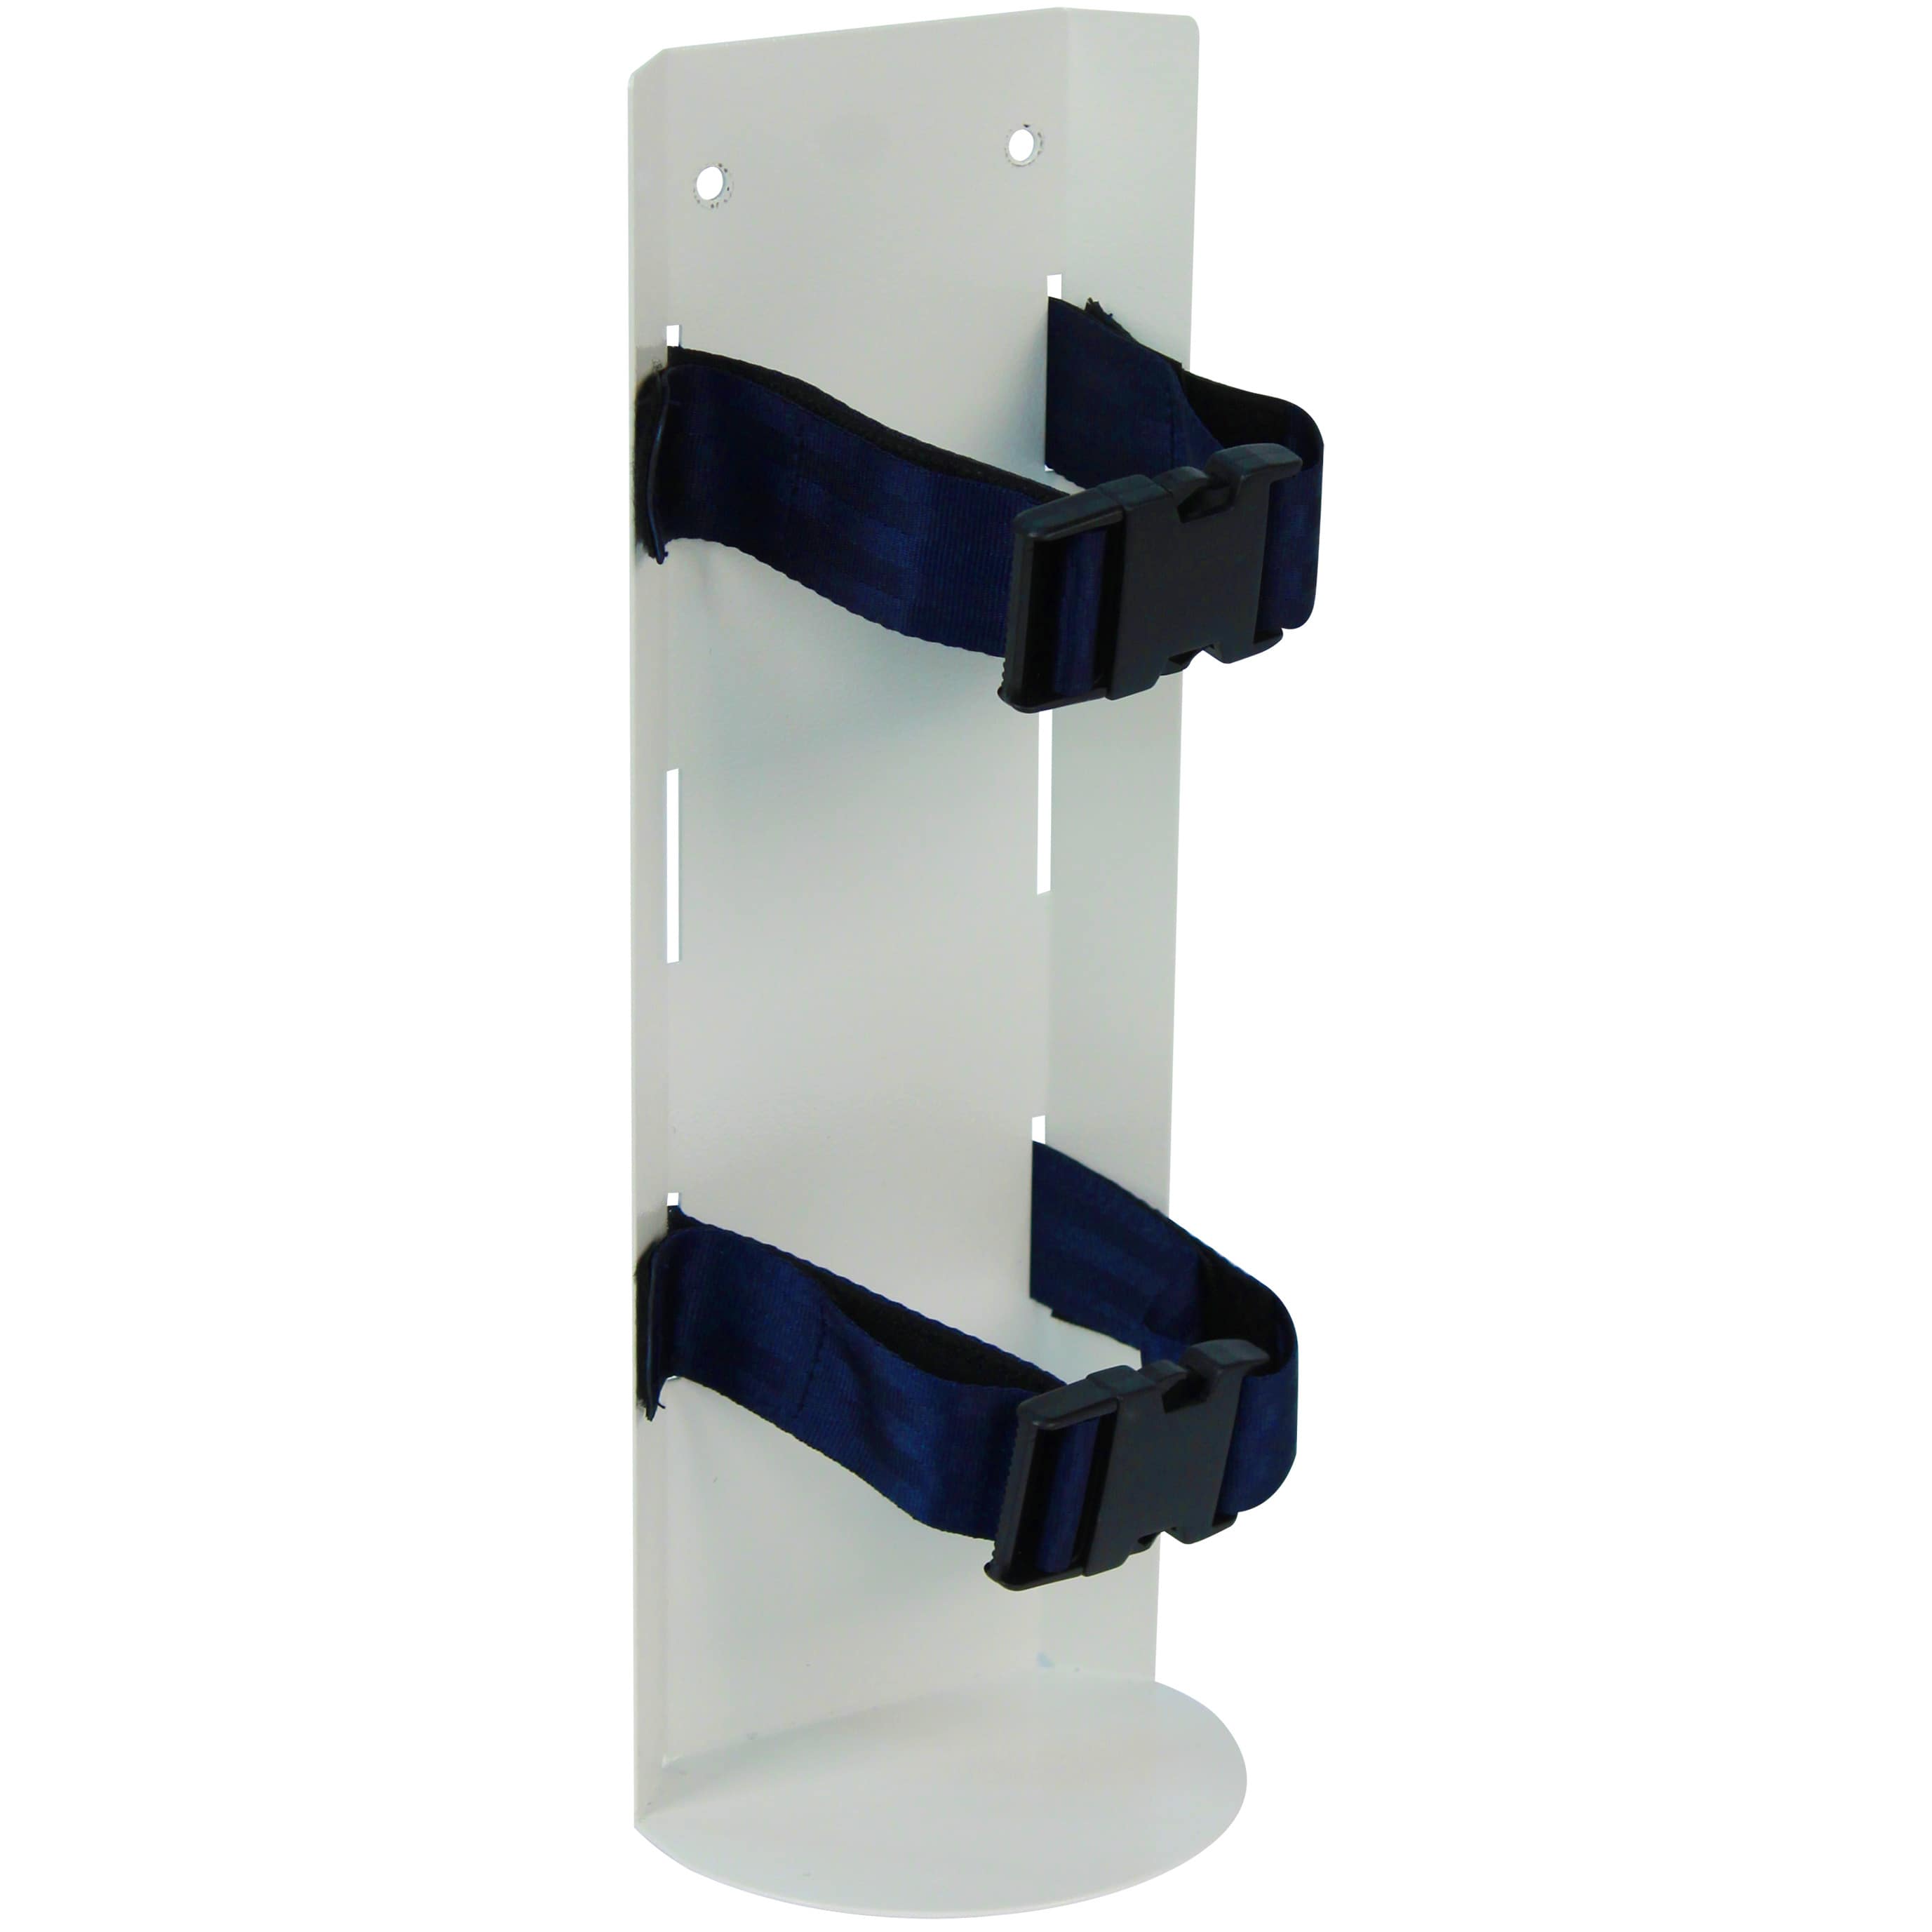 Detecto Rescue Series Oxygen Tank Holder with Accessory Rail